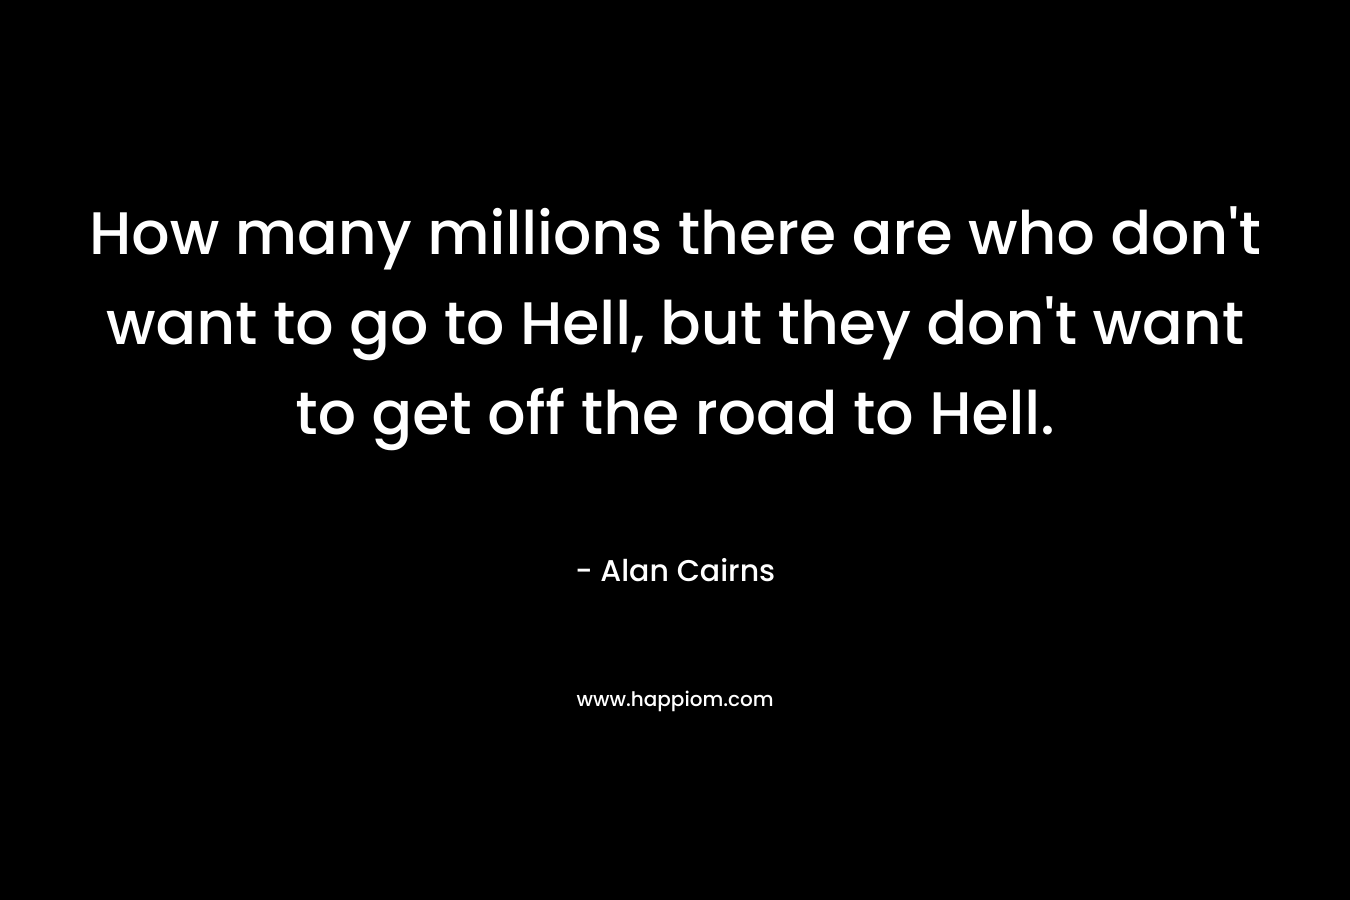 How many millions there are who don’t want to go to Hell, but they don’t want to get off the road to Hell. – Alan Cairns